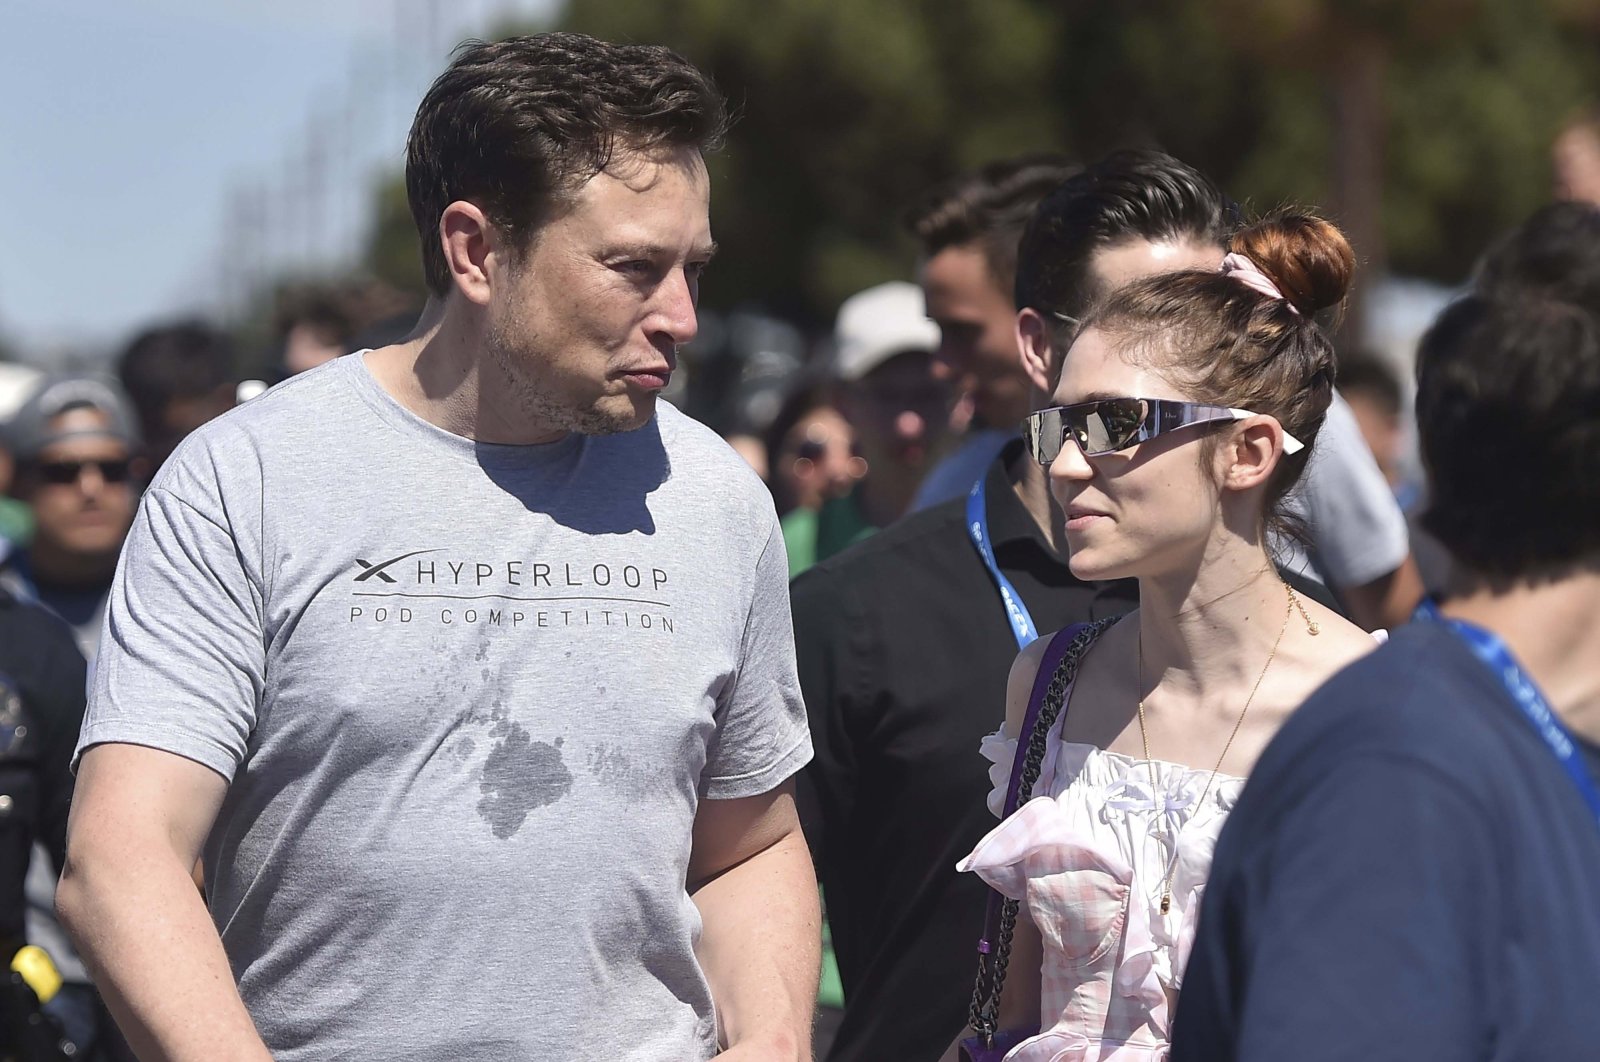 SpaxeX founder Elon Musk (L) and Canadian musician Grimes (Claire Boucher) attend the 2018 Space X Hyperloop Pod Competition, Hawthorne, California, July 22, 2018. (AFP Photo)